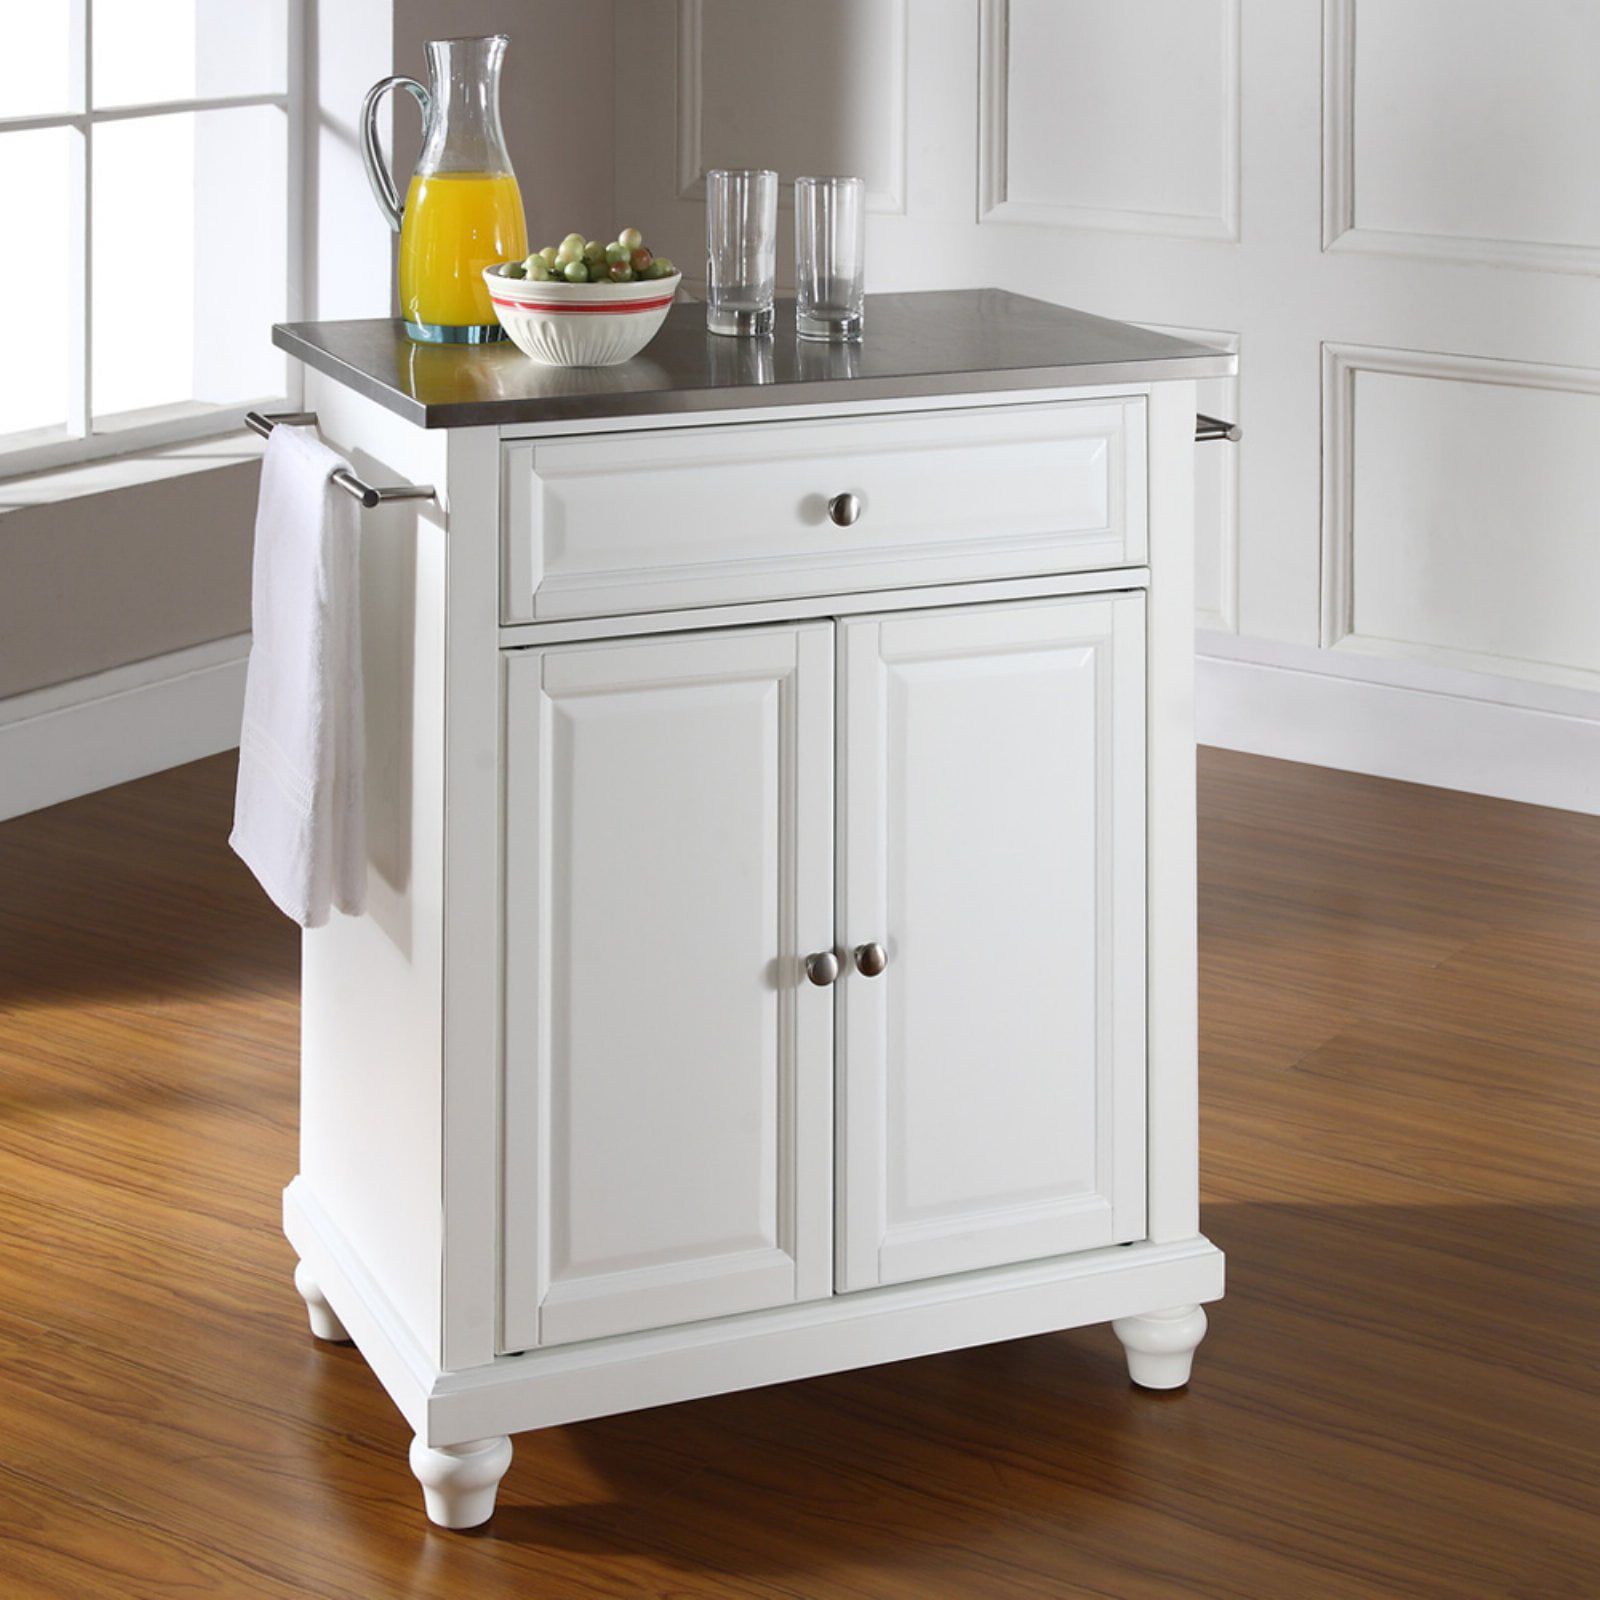 Crosley Furniture Cambridge Stainless Steel Top Portable Kitchen Island Stainless Steel Movable Kitchen Island